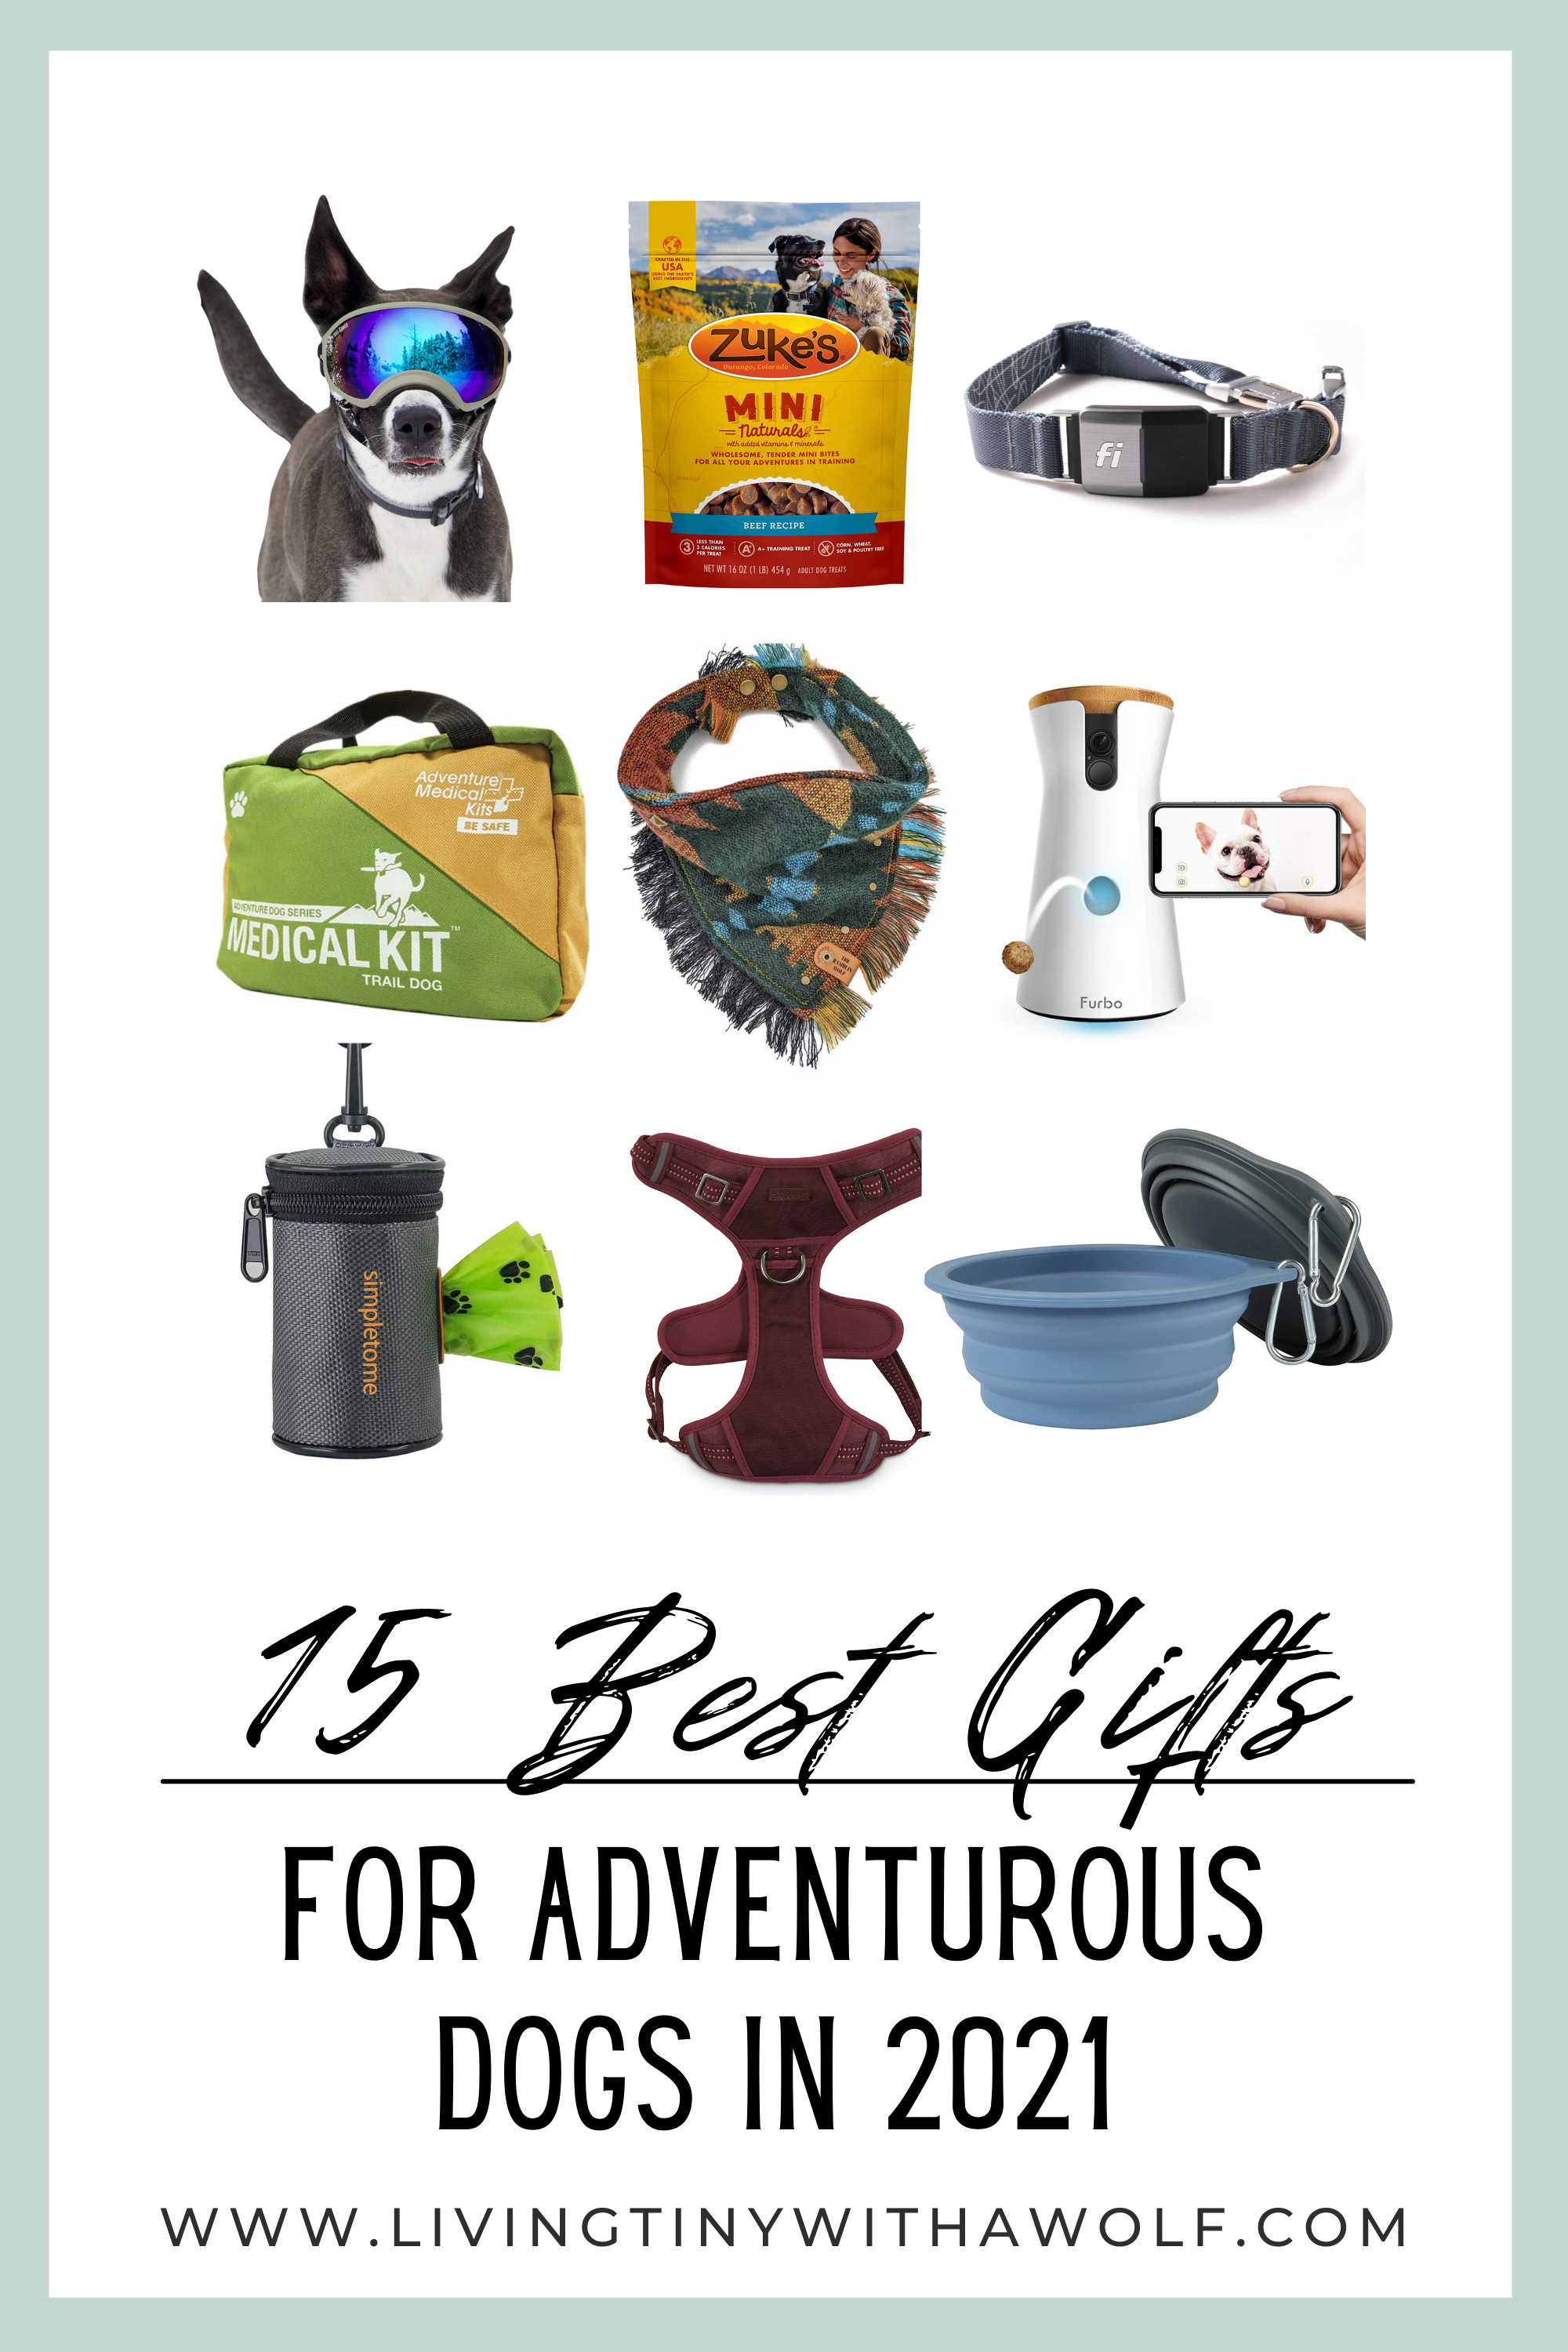 Get the 15 Best Gifts For Dogs While Spending Less